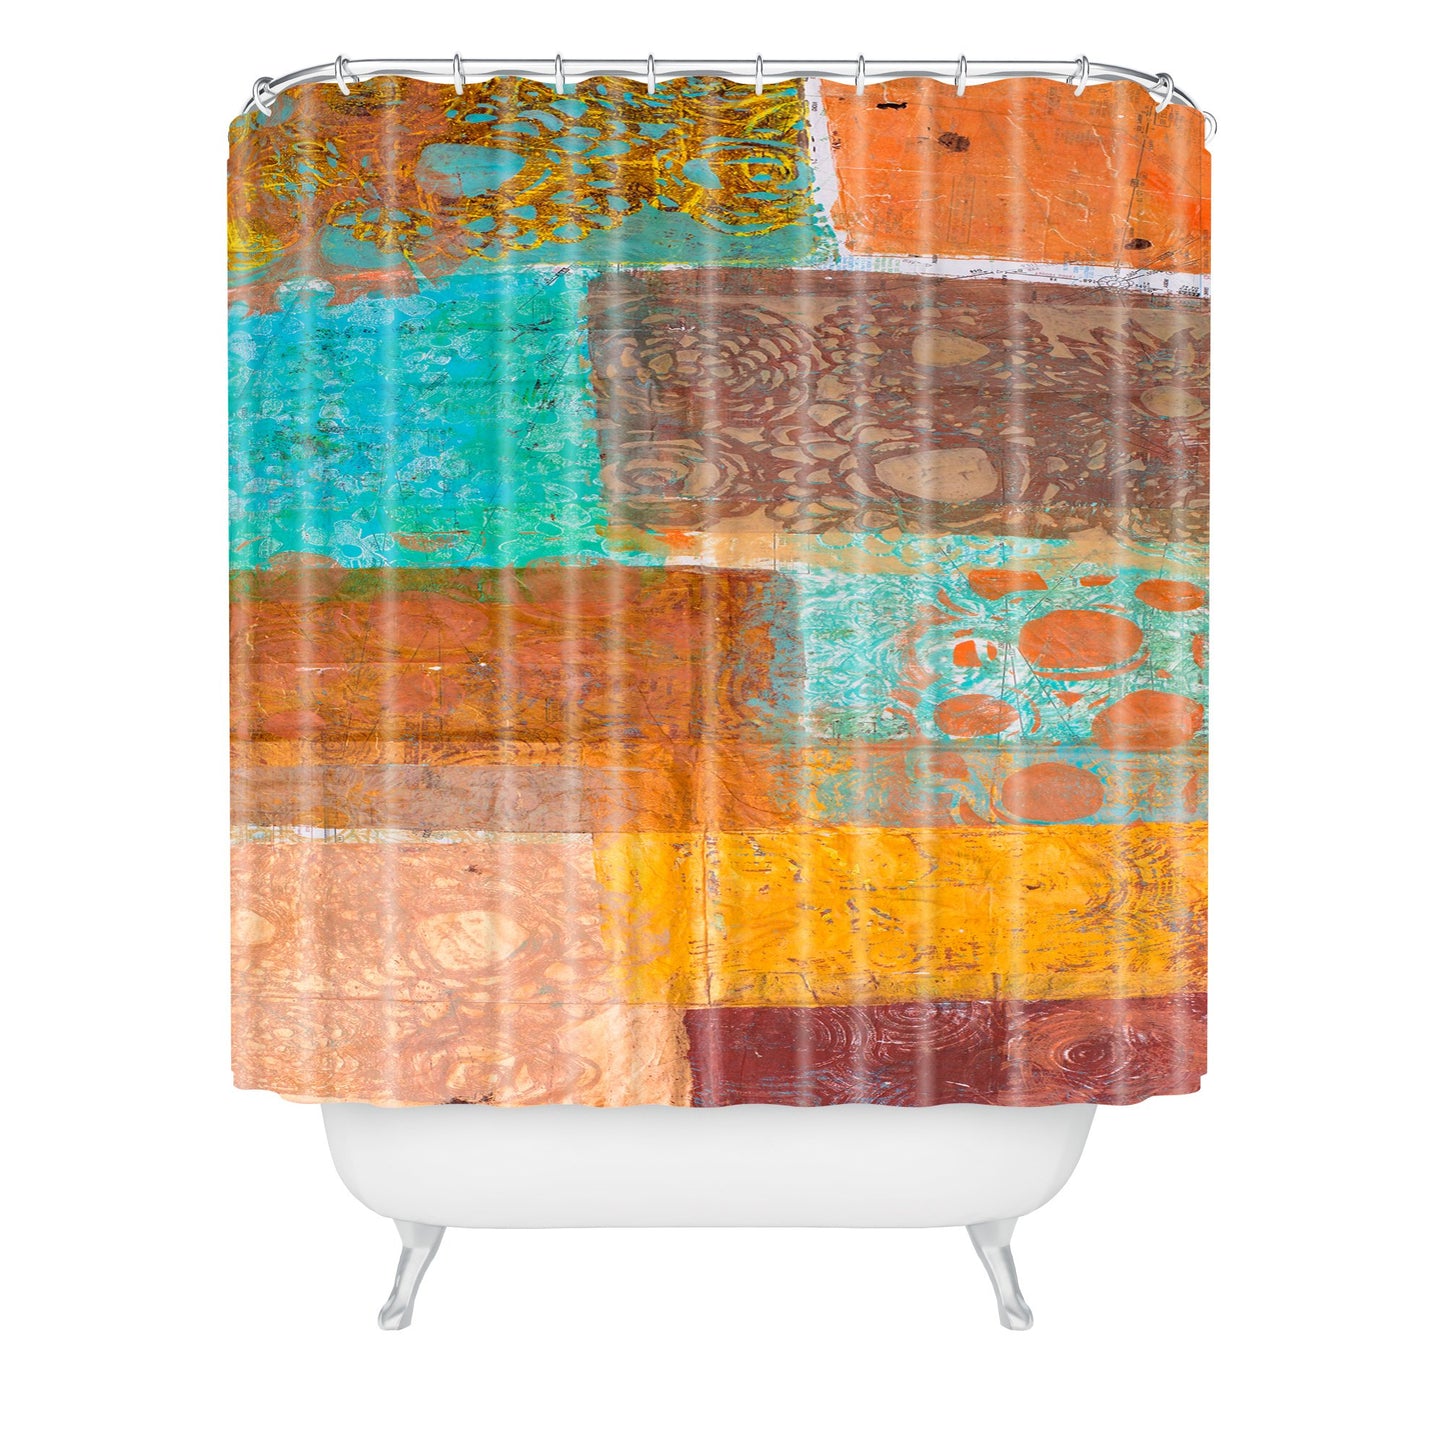 Turquoise Rustic Boards Shower Curtain - bathroom, boards, cow, cowgirl, curtain, decor, hairy, highland, home, home decor, homedecor, ranch, rodeo, rustic, shower, shower curtains, shower curtians, southwestern, southwesterndecor, southwesternhomedecor, turquoise, turquoise boards, western, western decor, western home decor, westerndecor, westernhomedecor, westernshowercurtain -  - Baha Ranch Western Wear